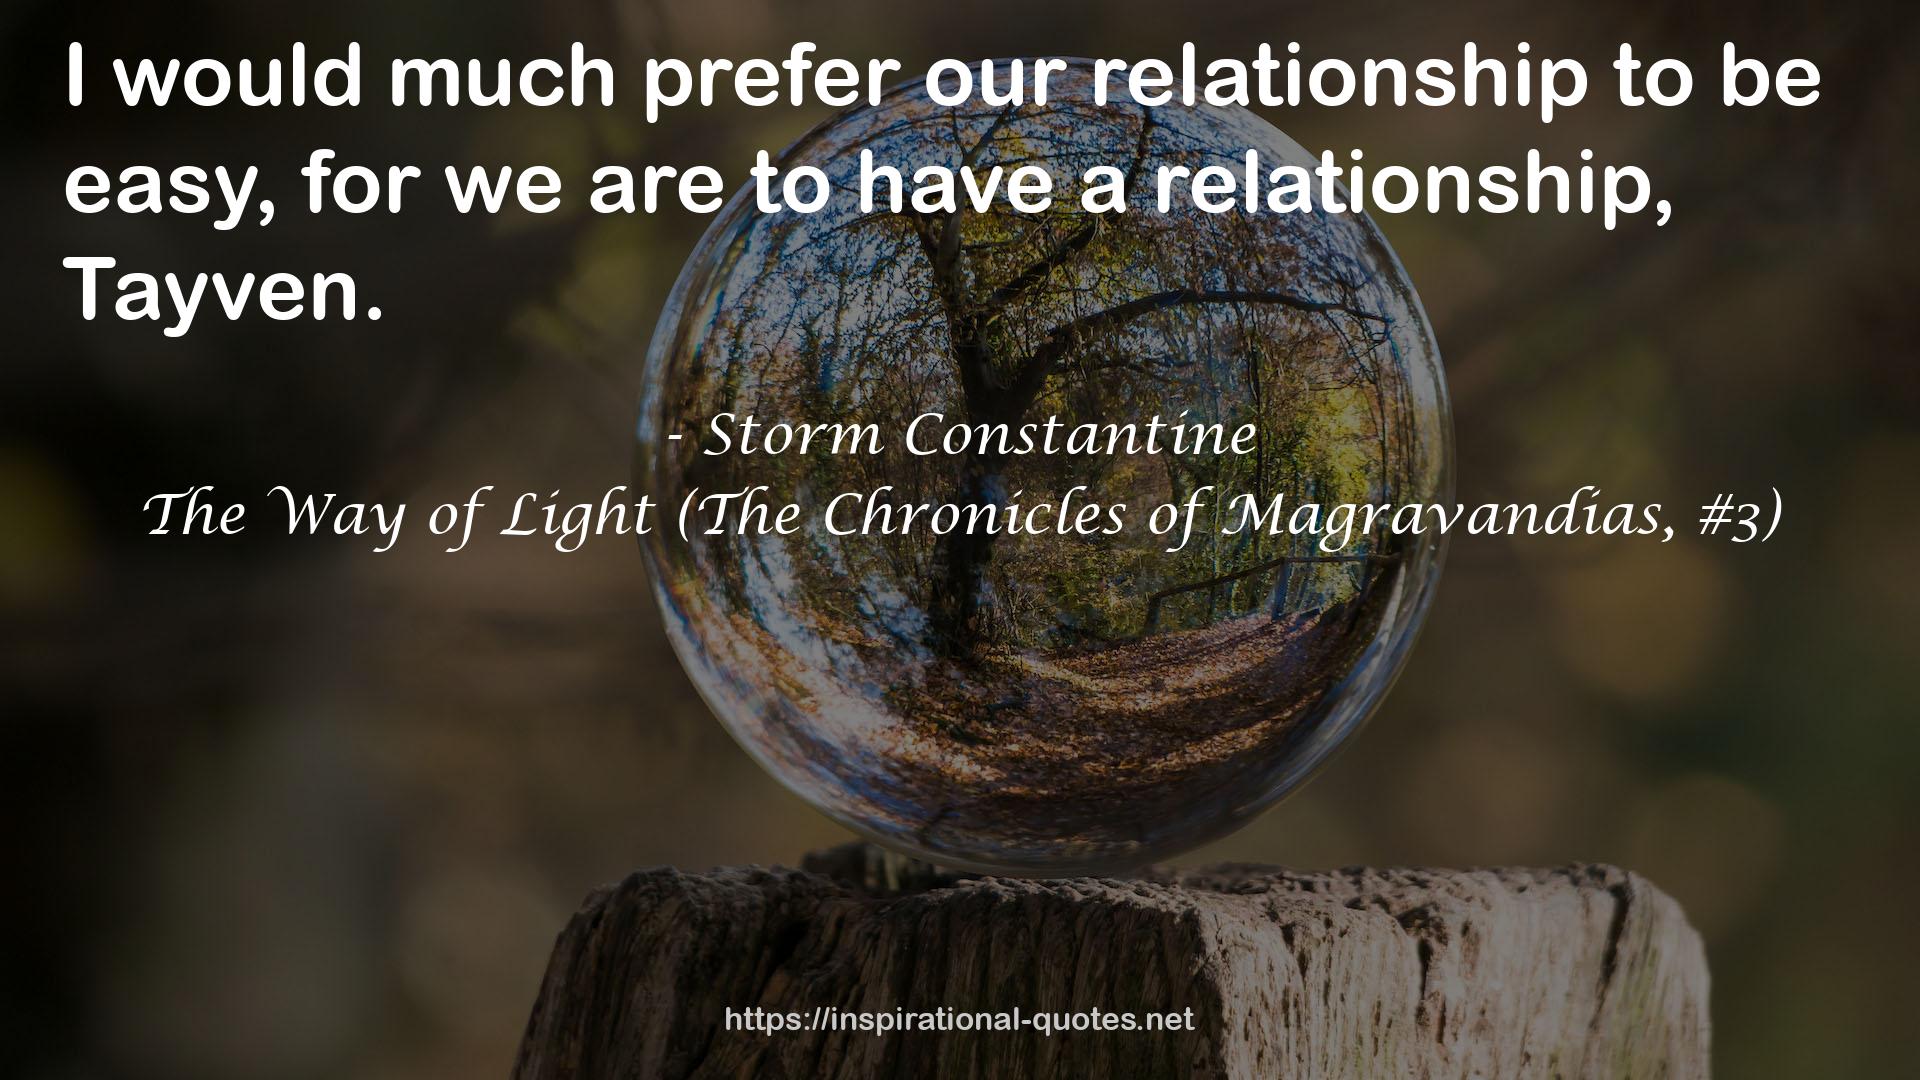 The Way of Light (The Chronicles of Magravandias, #3) QUOTES